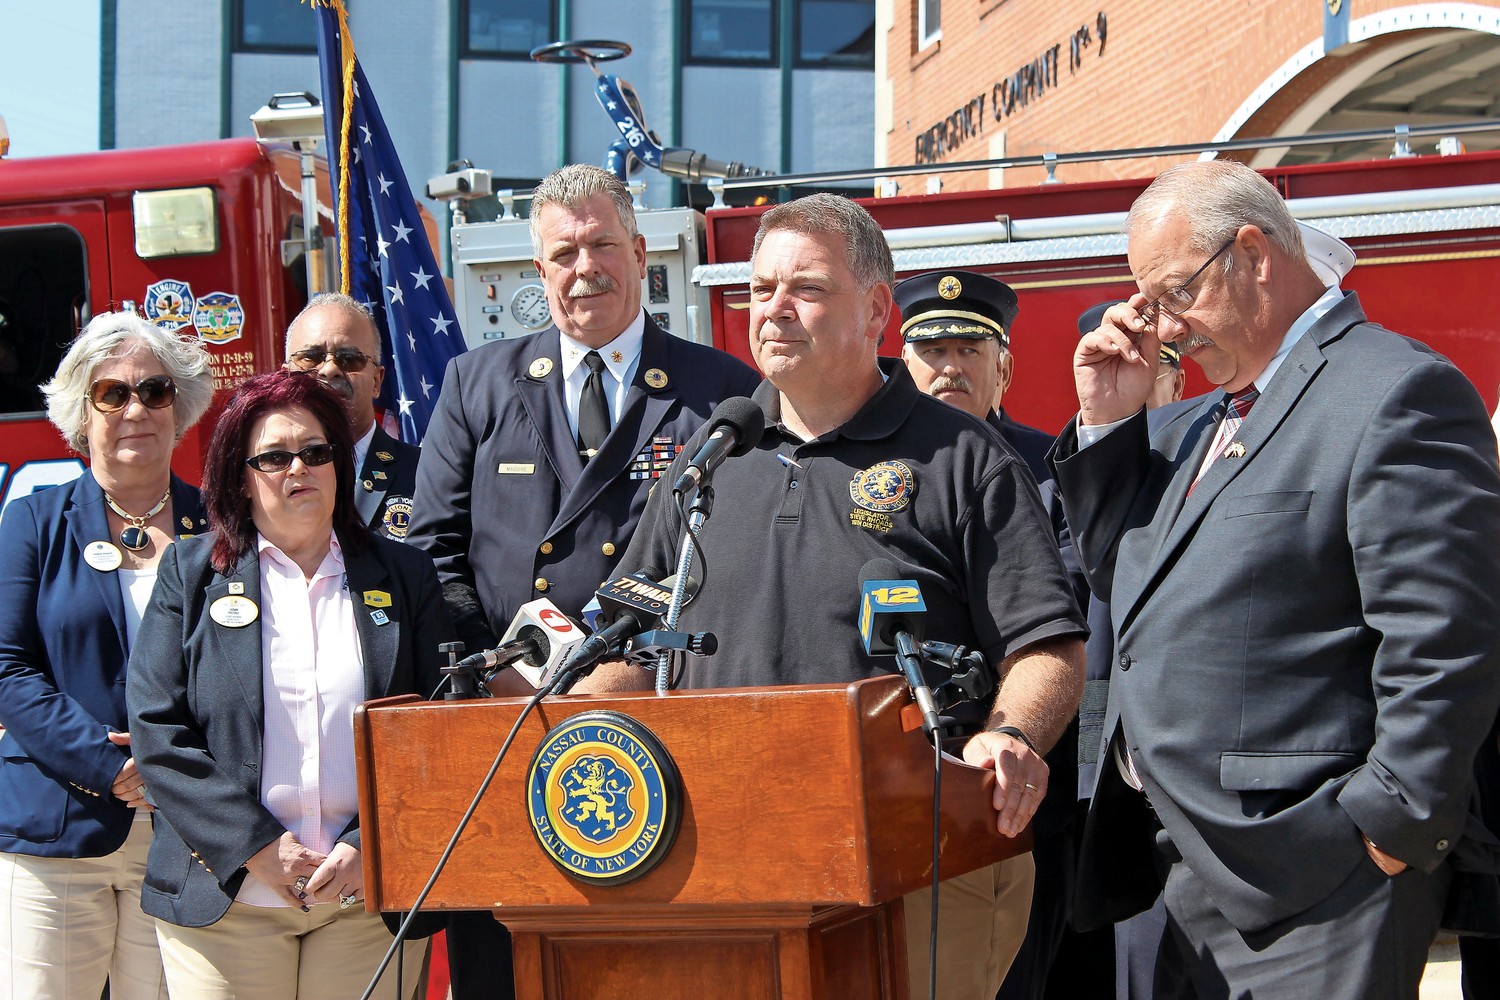 At a news conference at the Freeport Fire Department Headquarters on Aug. 30, Nassau County Legislator Steve Rhoads kicked off a supply drive to aid the victims of Hurricane Harvey.